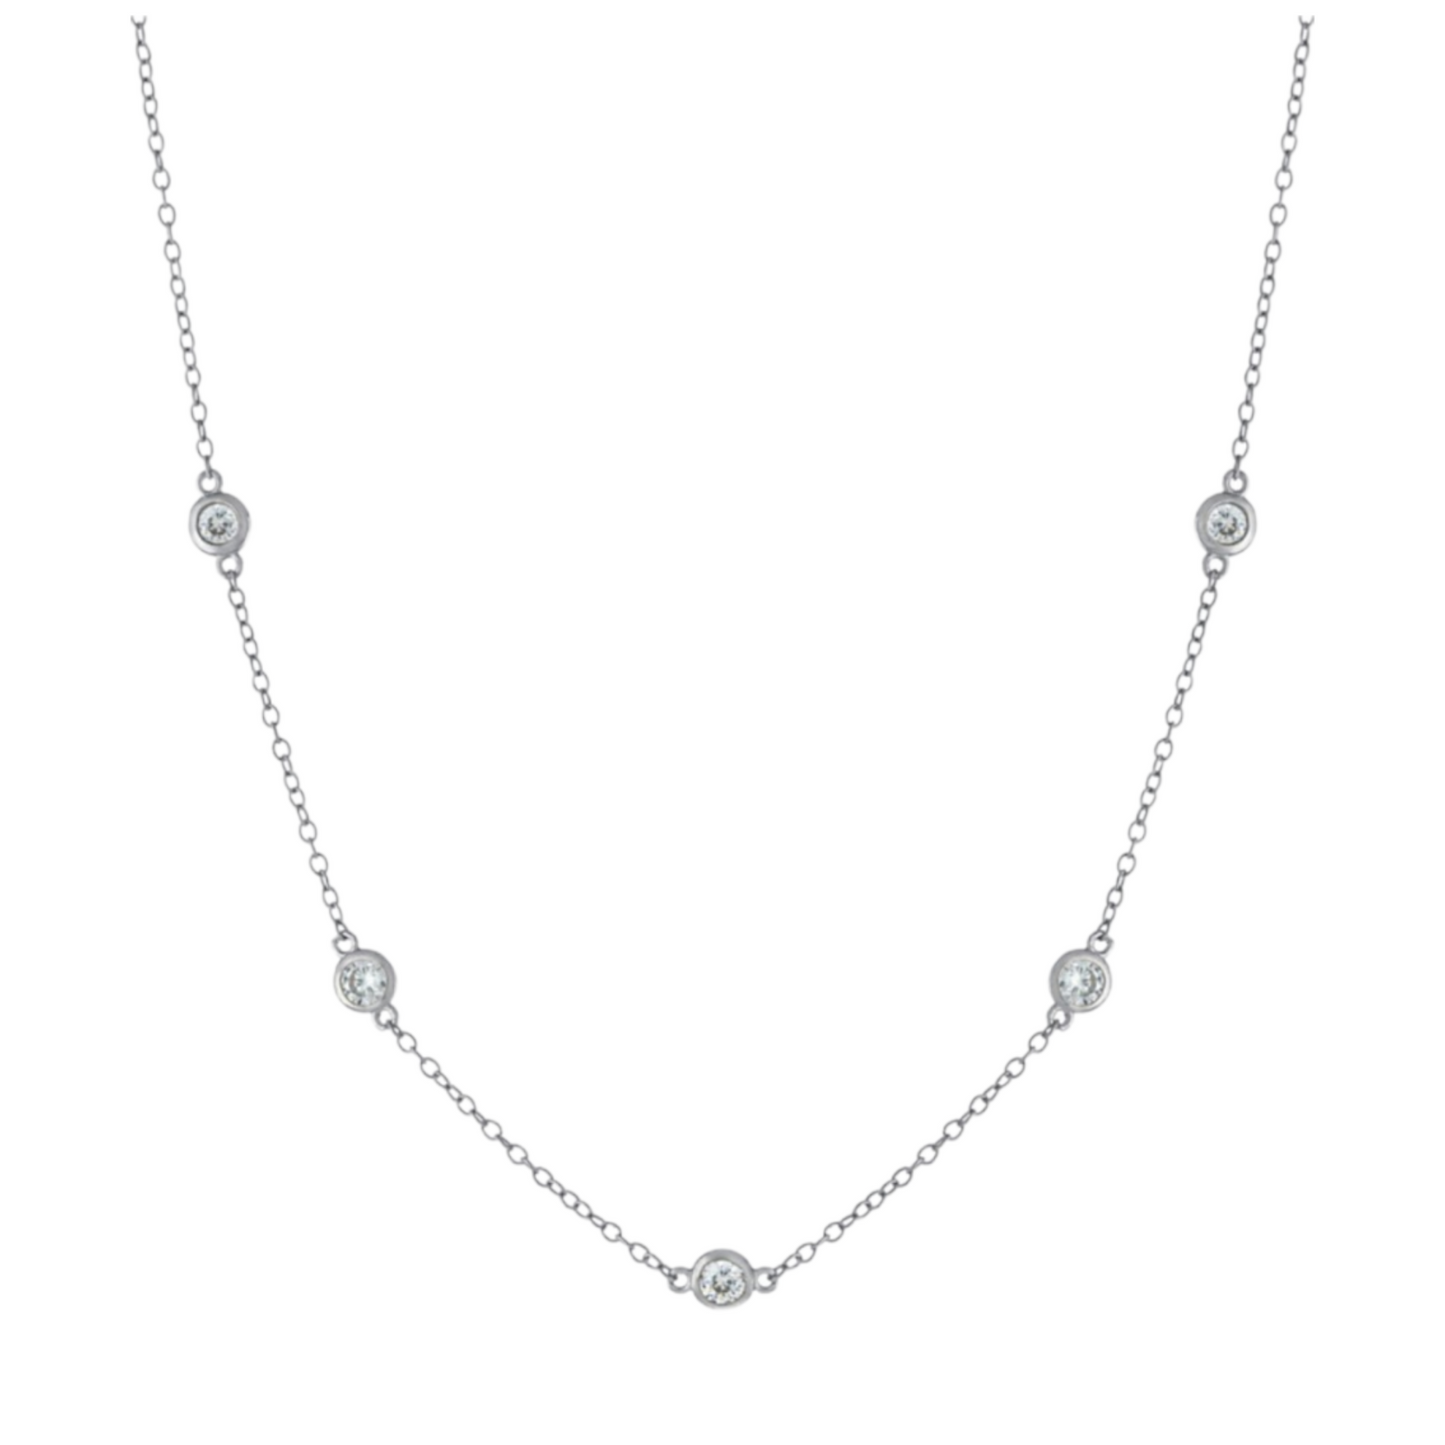 Cubic Zirconia Station Statement Necklace in Sterling Silver, 16" +
2" extender